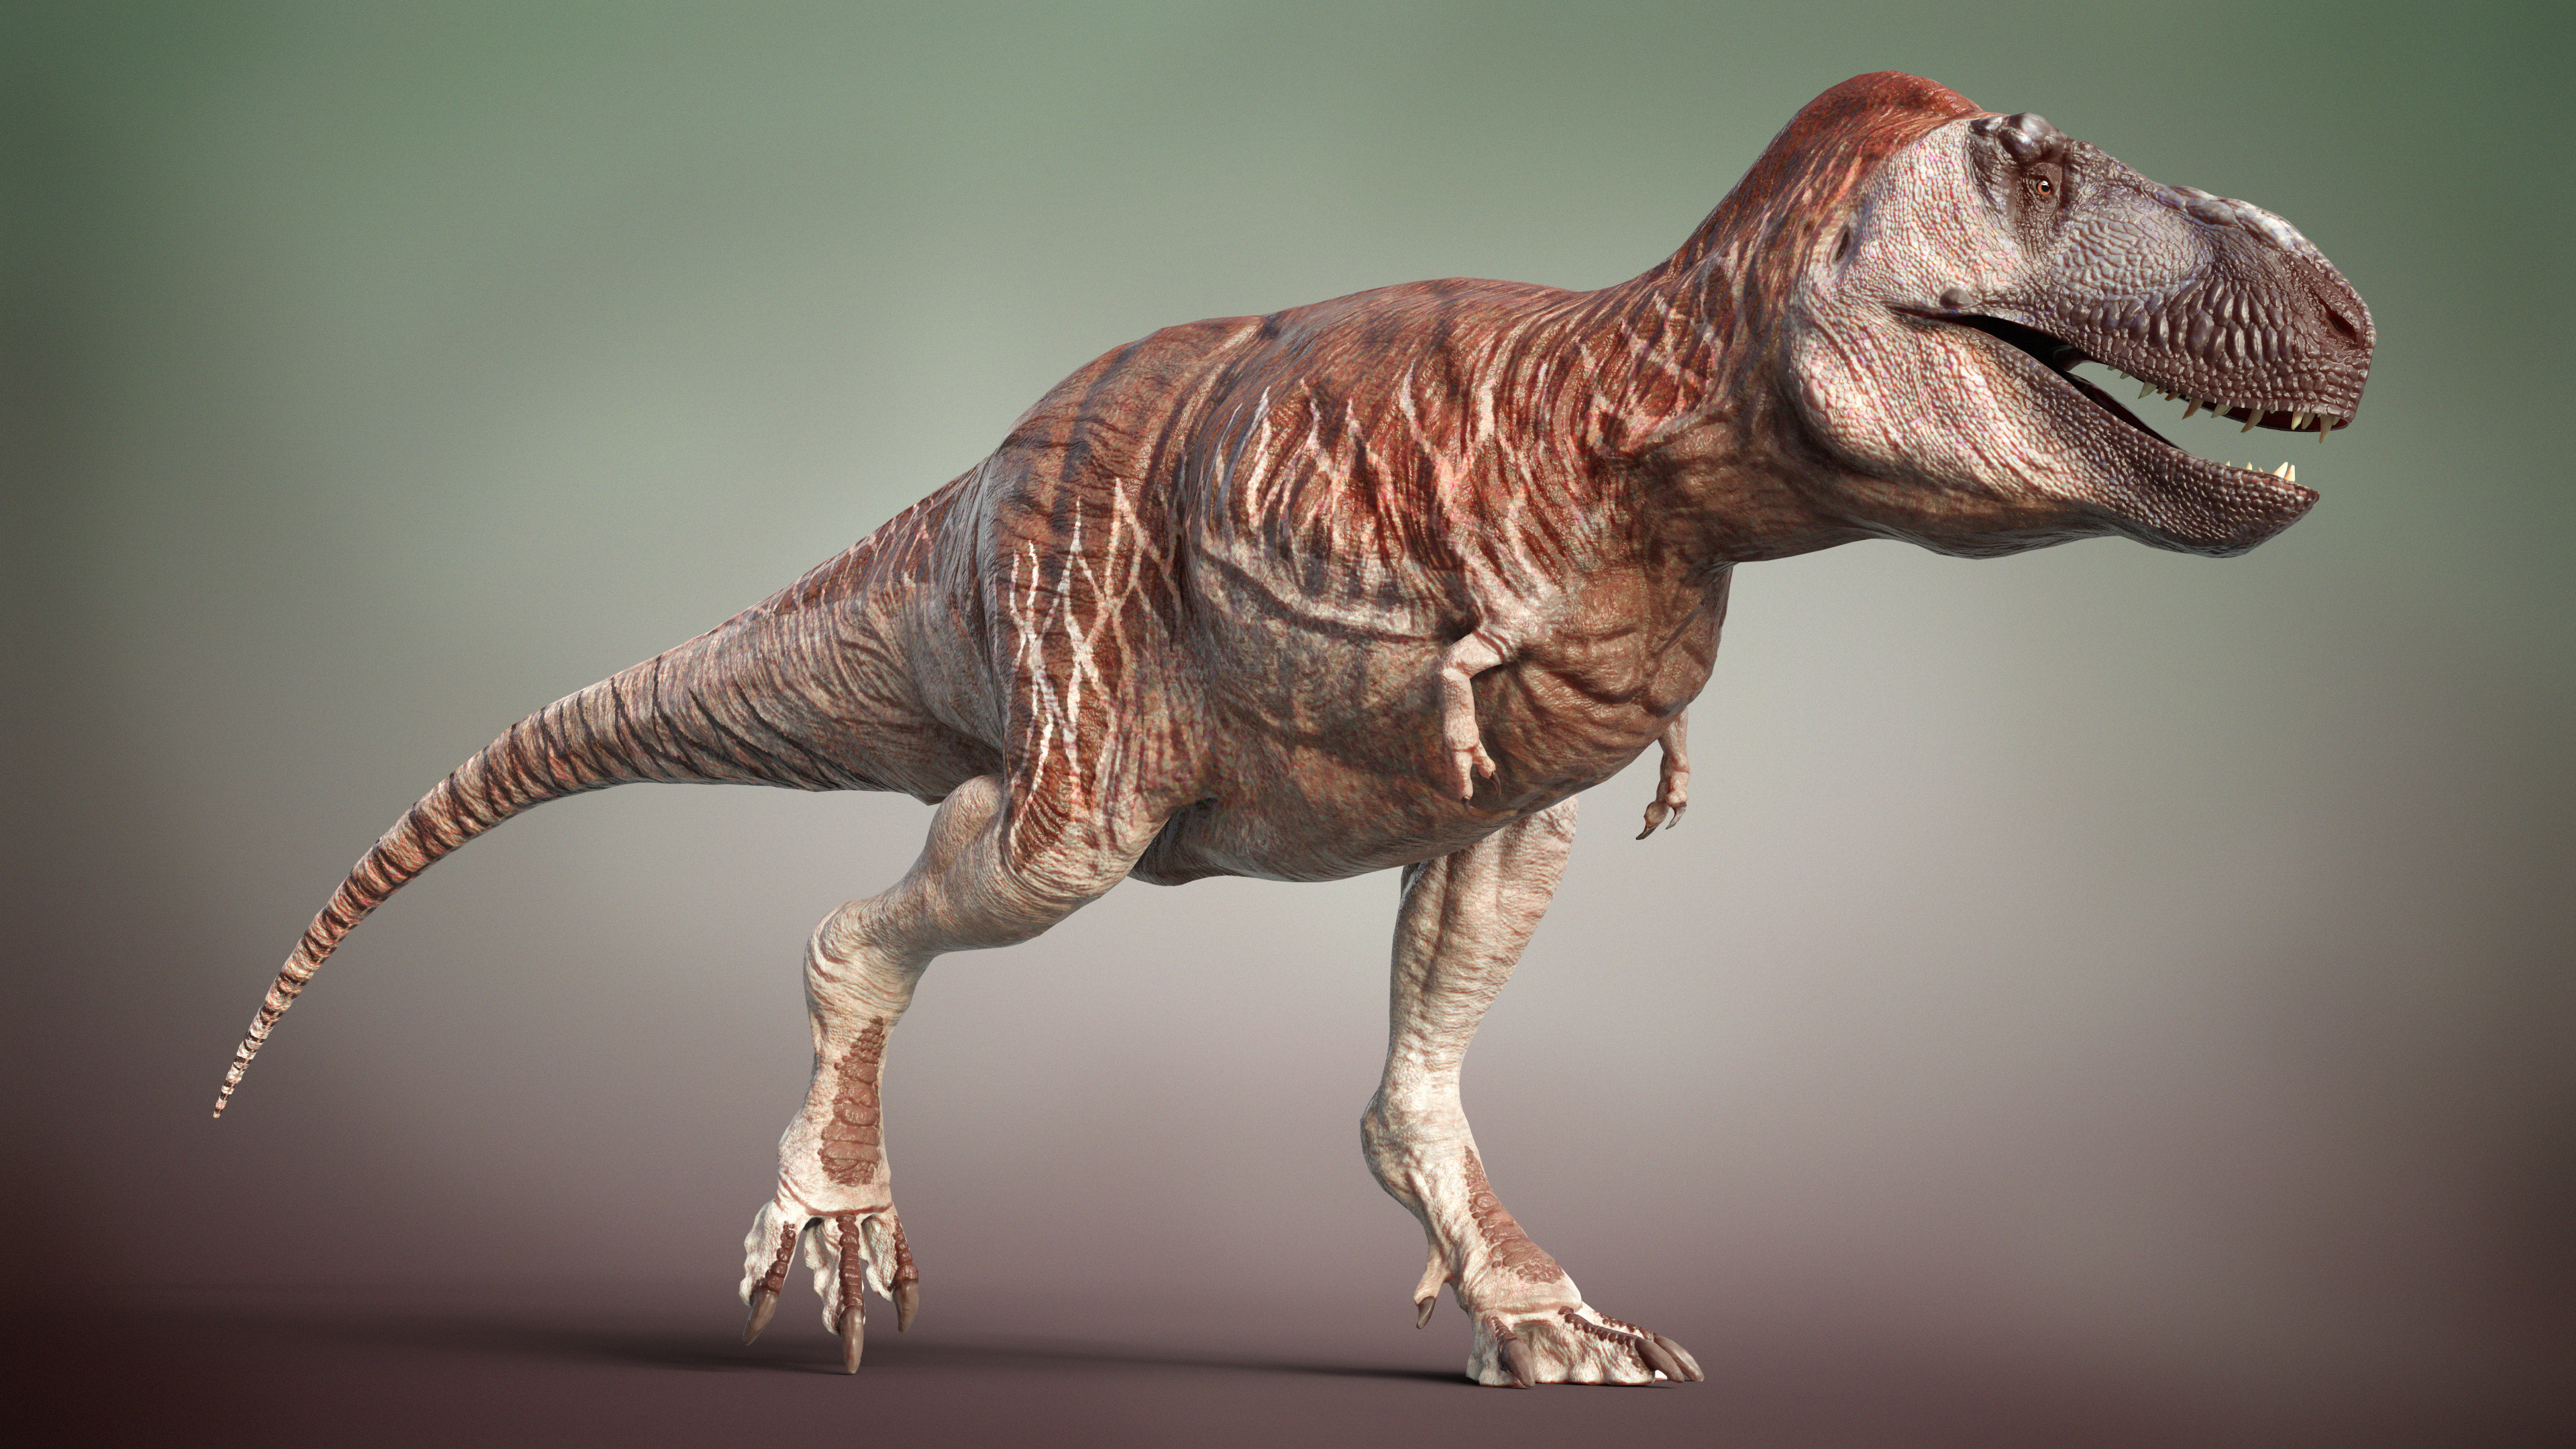 Tyrannosaurus rex Life Reconstruction - Finished Projects - Blender Artists  Community